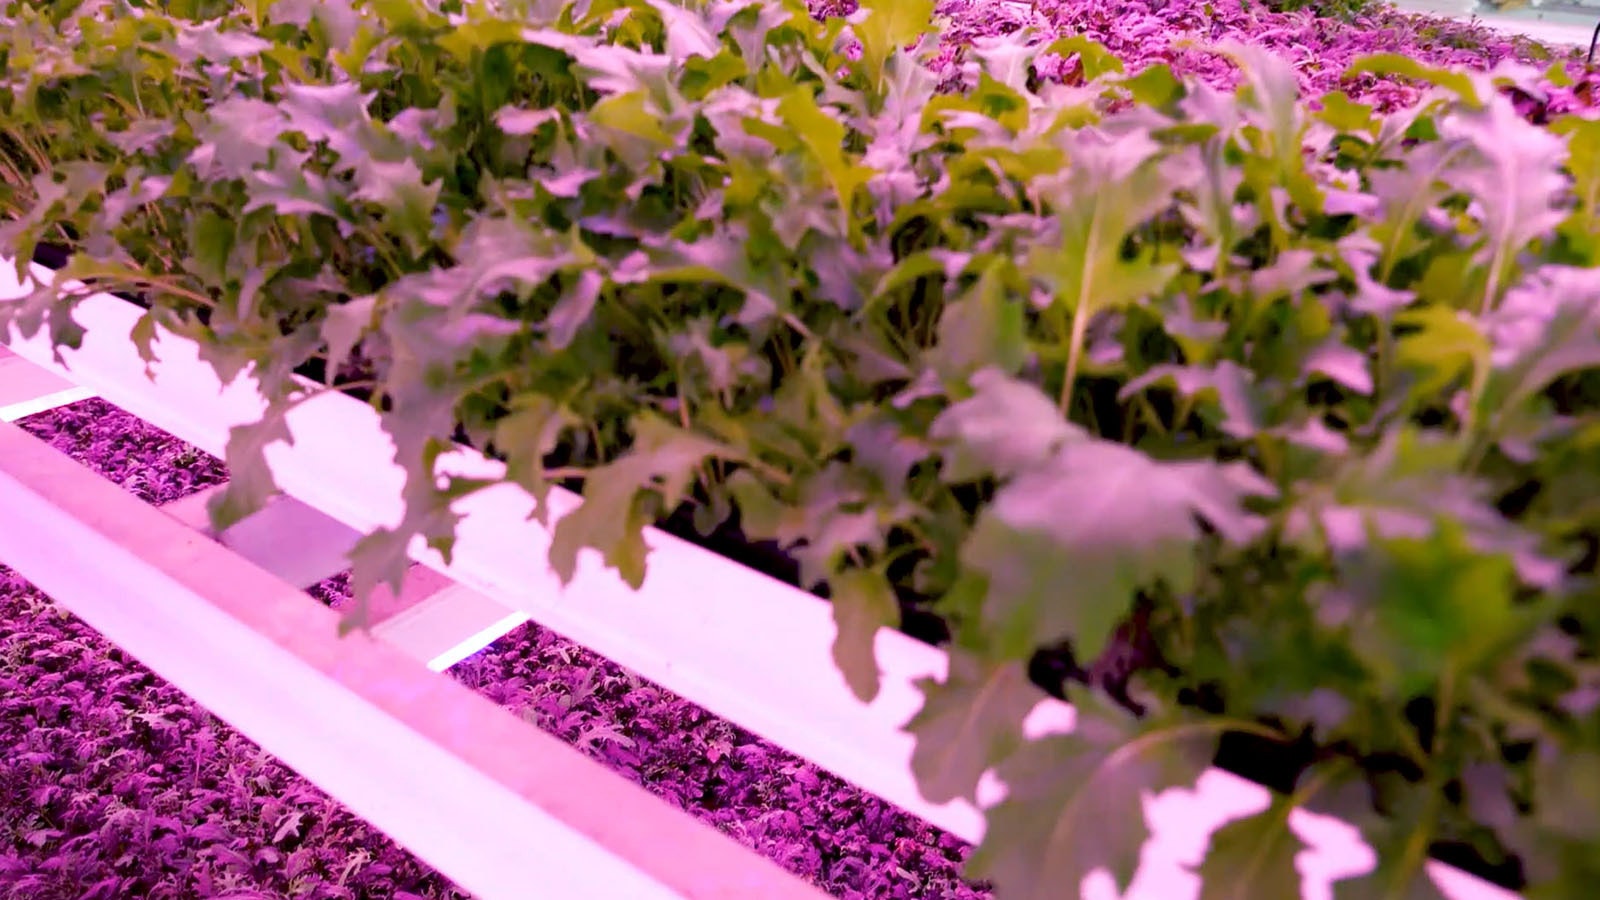 Vertical Harvest produces a wide variety of greens at its Jackson, Wyoming, facility.